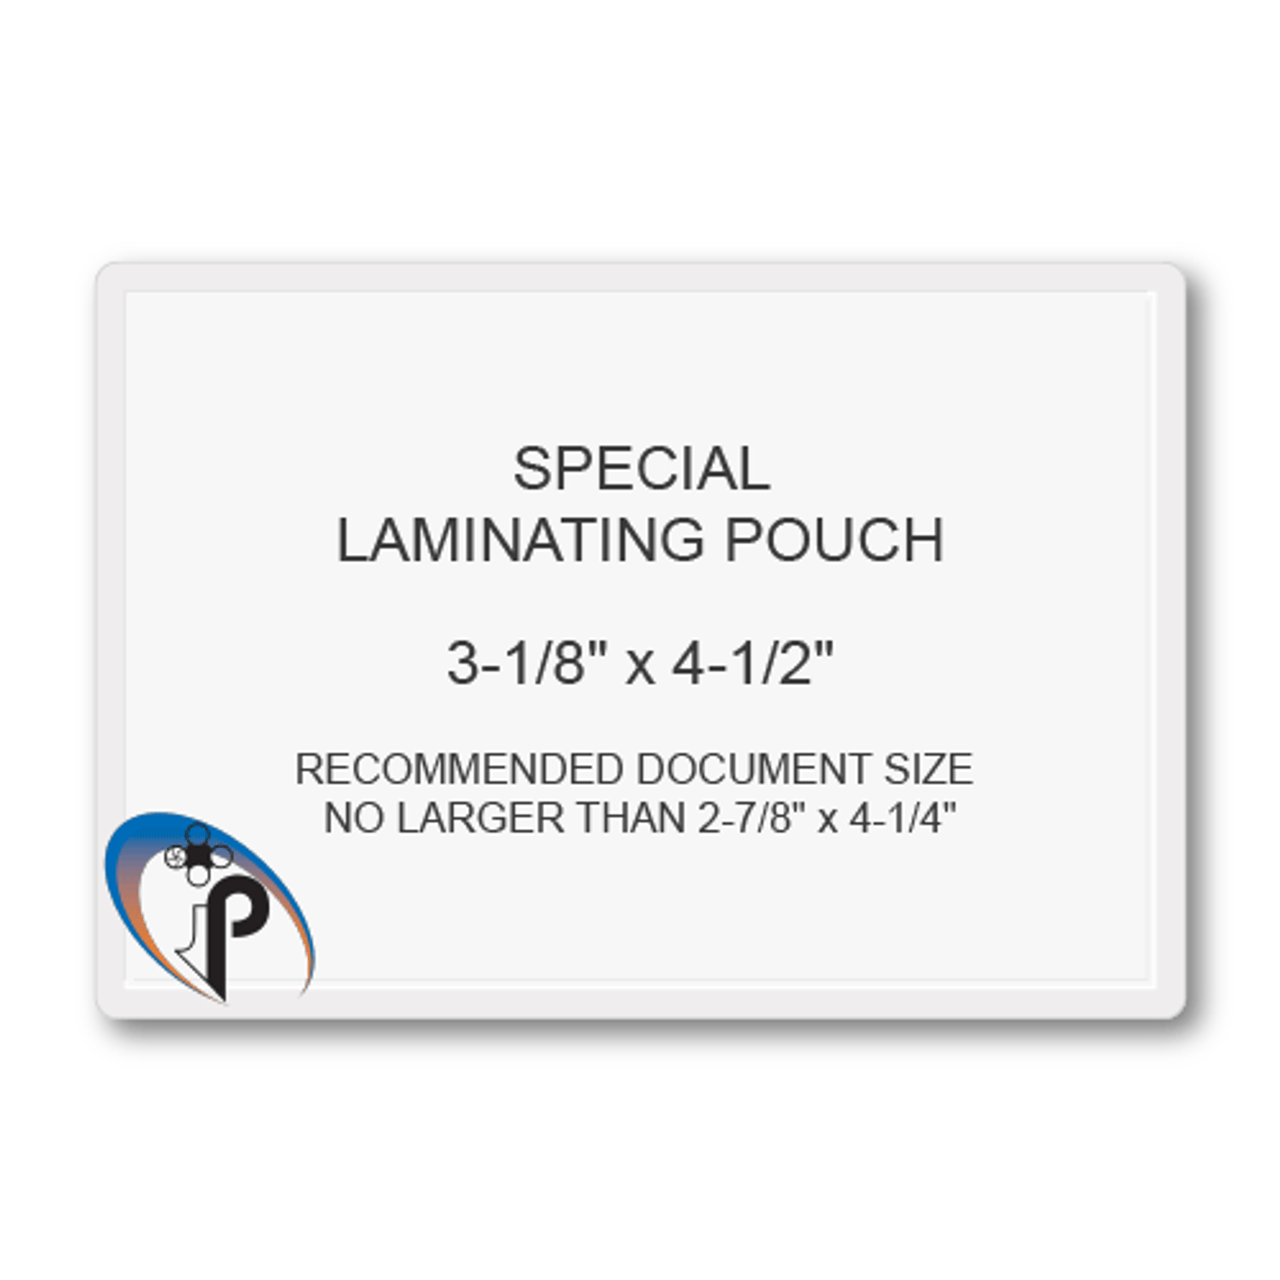 special-laminating-pouch-7-mil